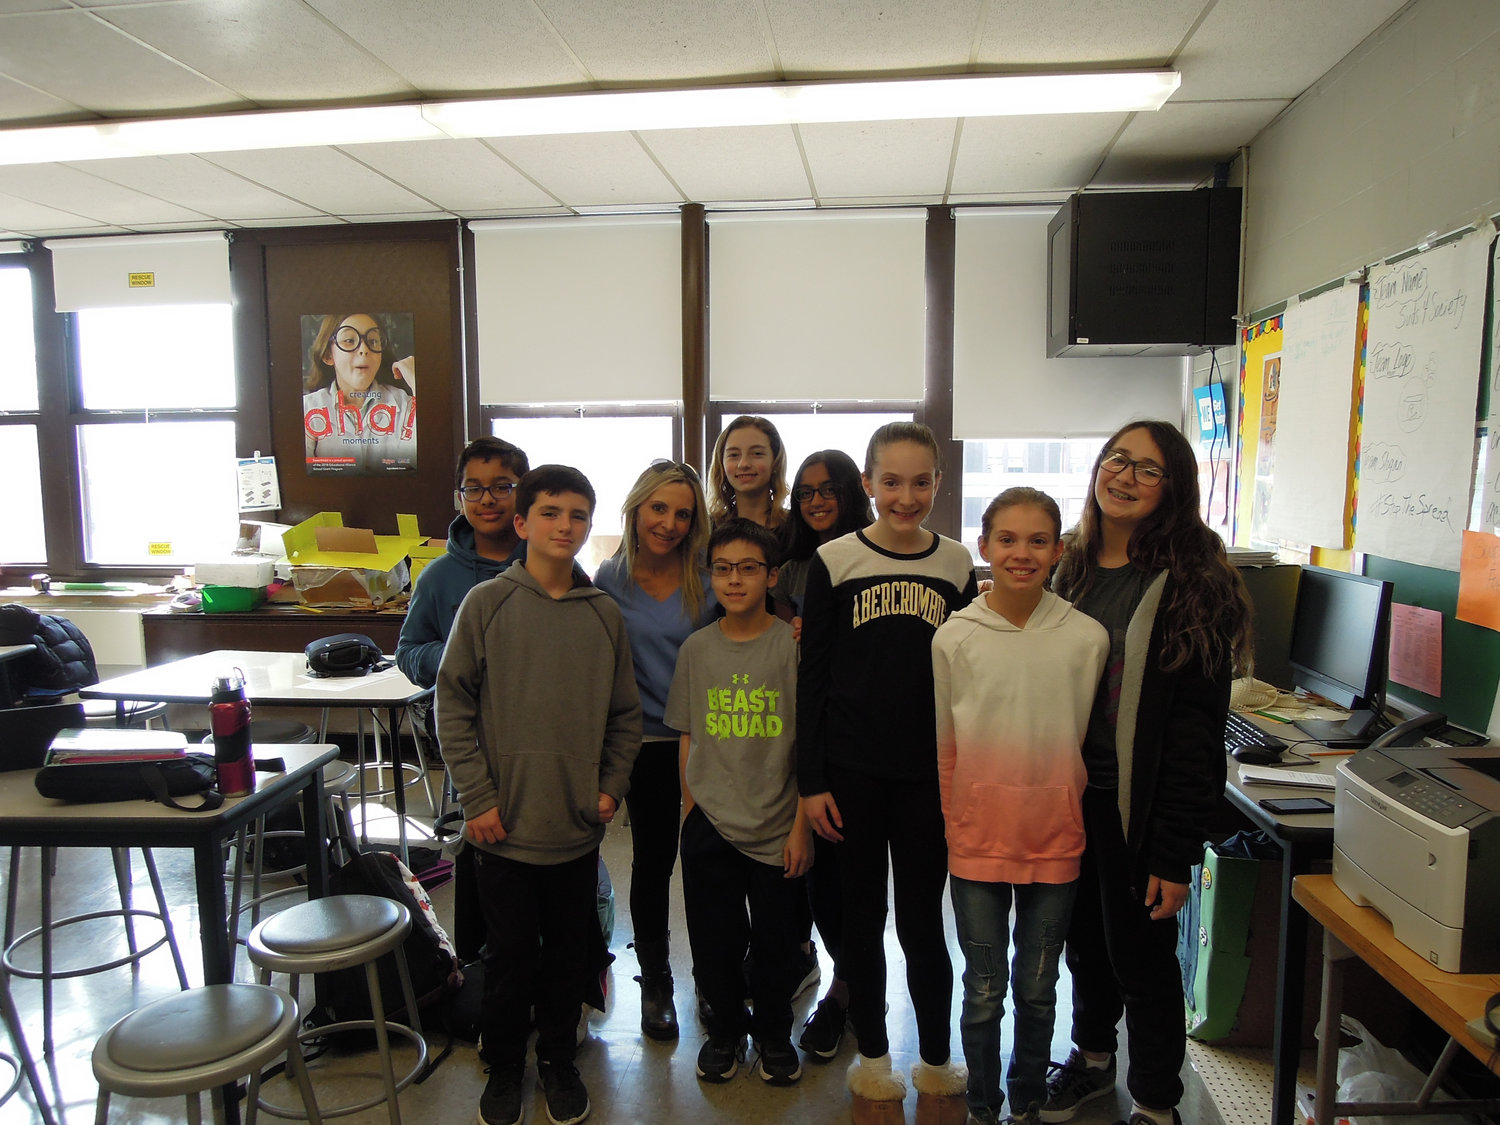 Wantagh Middle School’s EsSCENTial Melts team won $10,000 in the annual Lead2Feed Student Challenge last month for a project addressing the mental health needs of their schoolmates and community. Teacher Patti Andreolas was third from left.